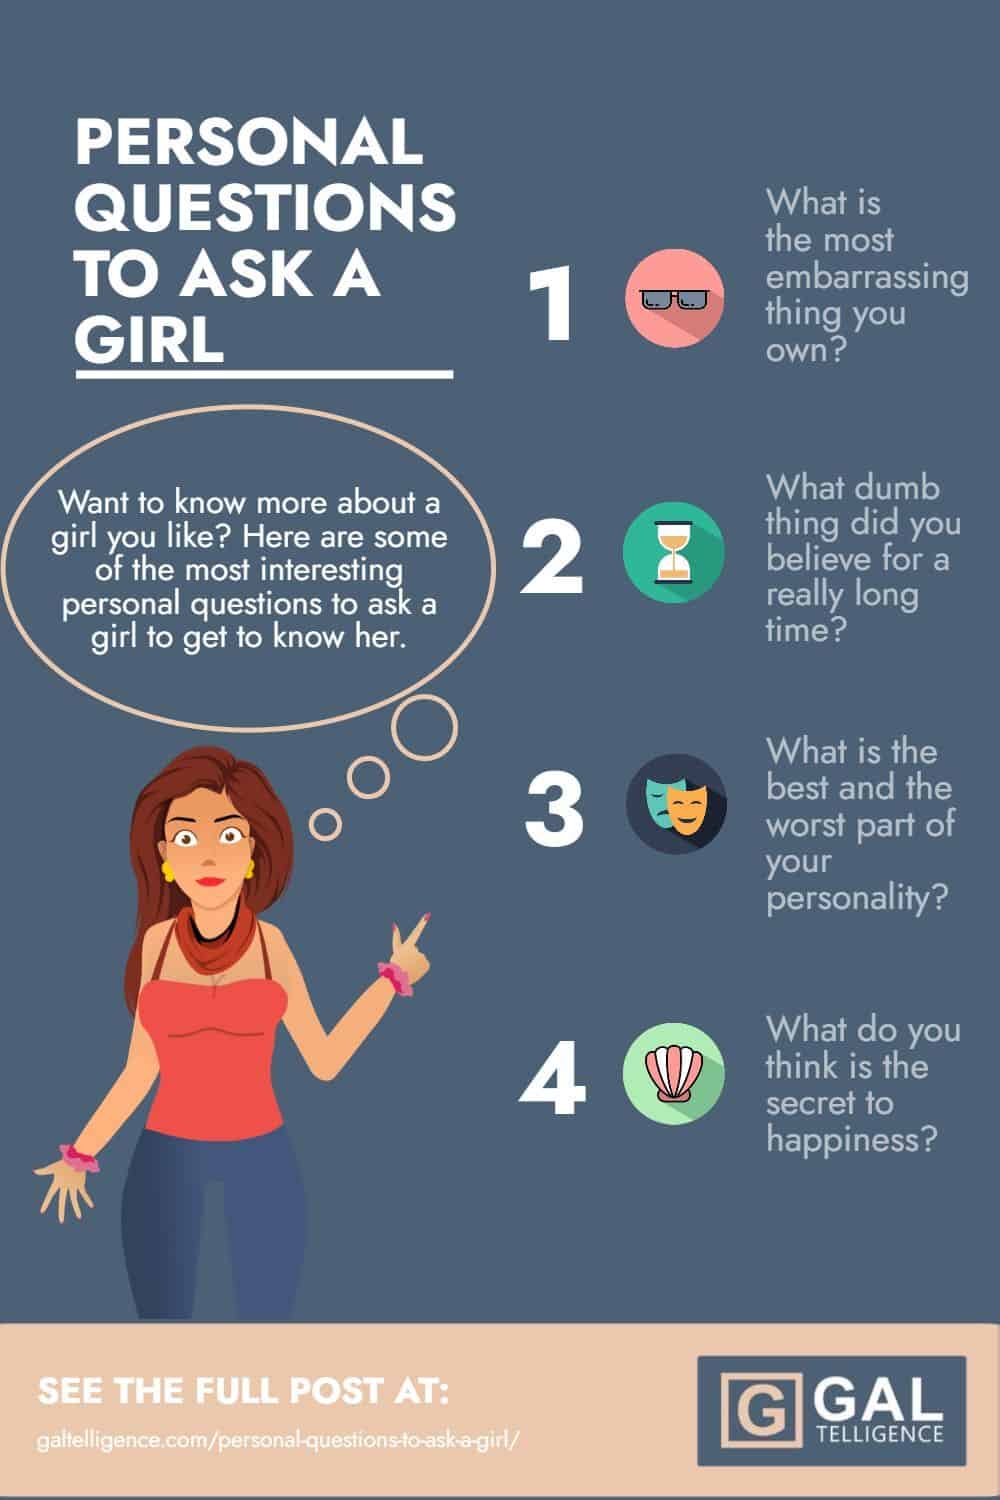 PERSONAL QUESTIONS TO ASK A GIRL INFOGRAPHIC 